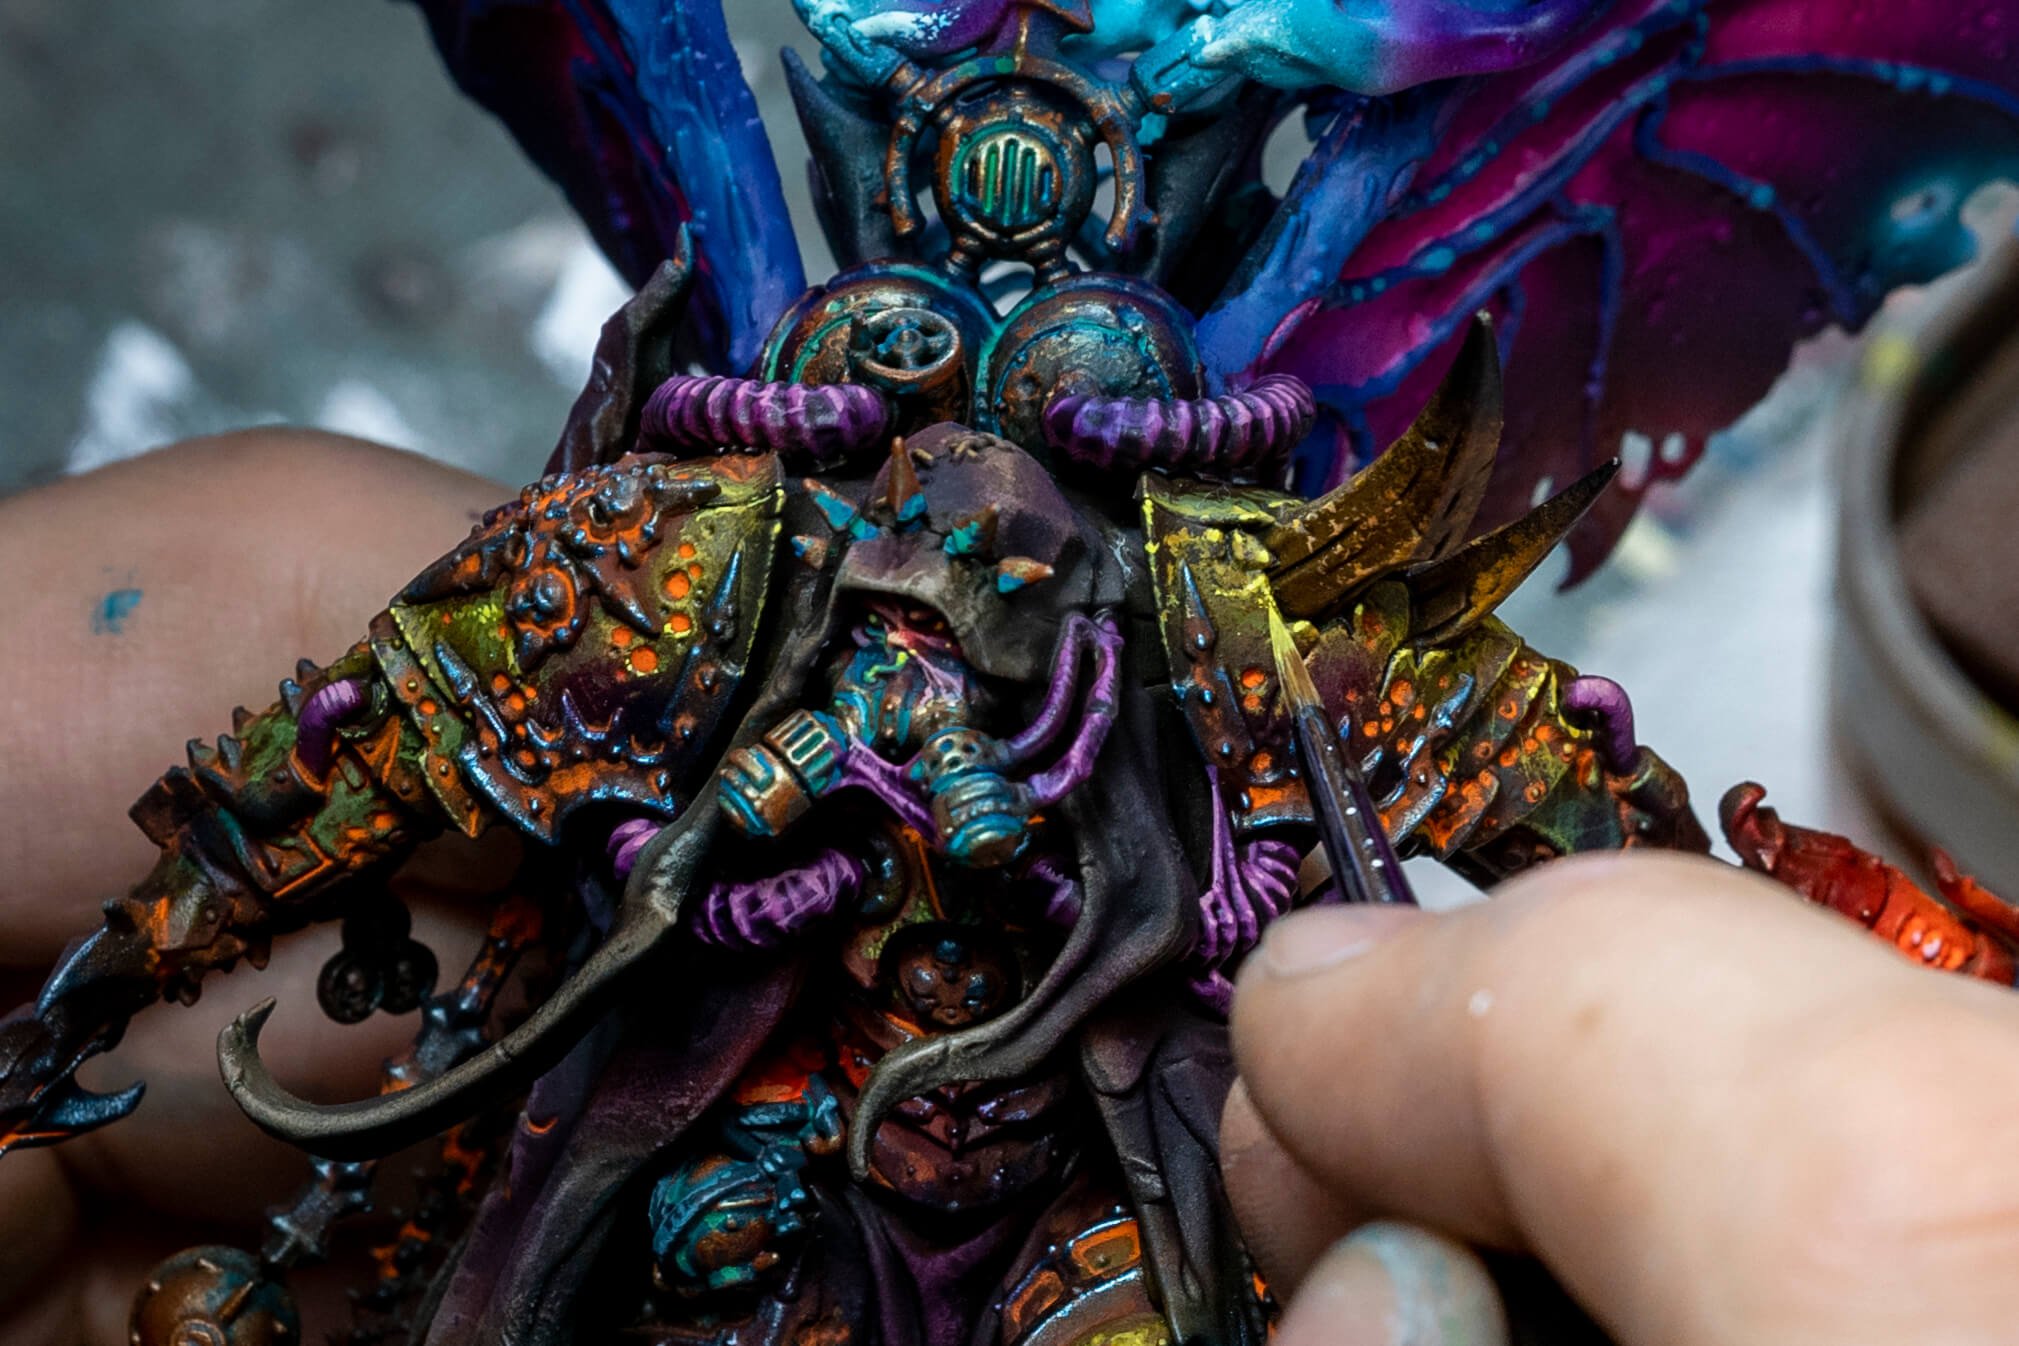 How to paint Warhammer miniatures: Final layers and details of the miniature